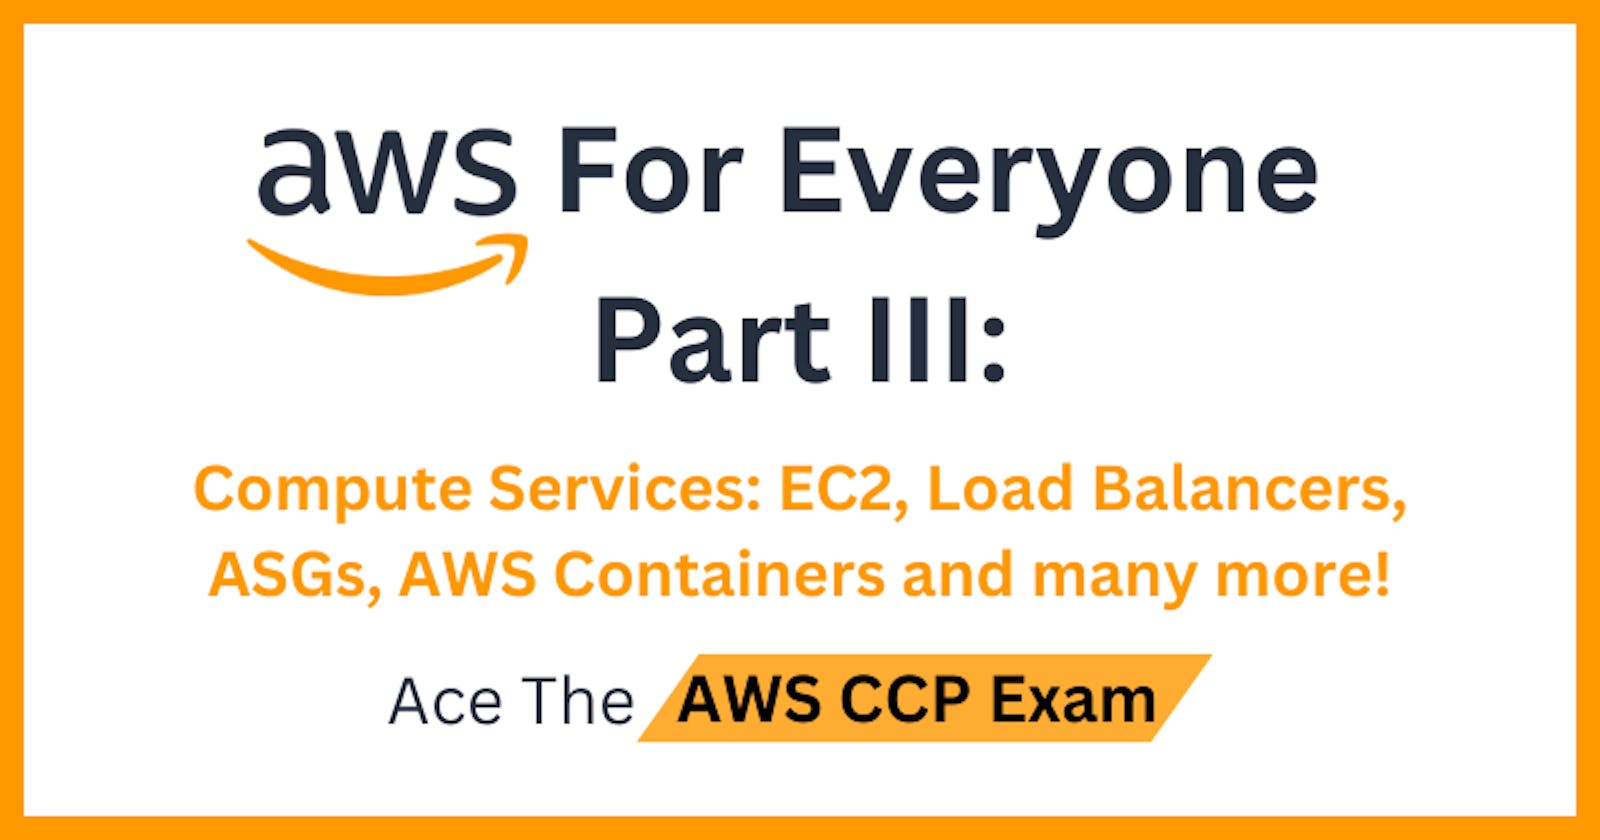 AWS For Everyone - Part III: Compute Services, EC2, Load Balancers and more!